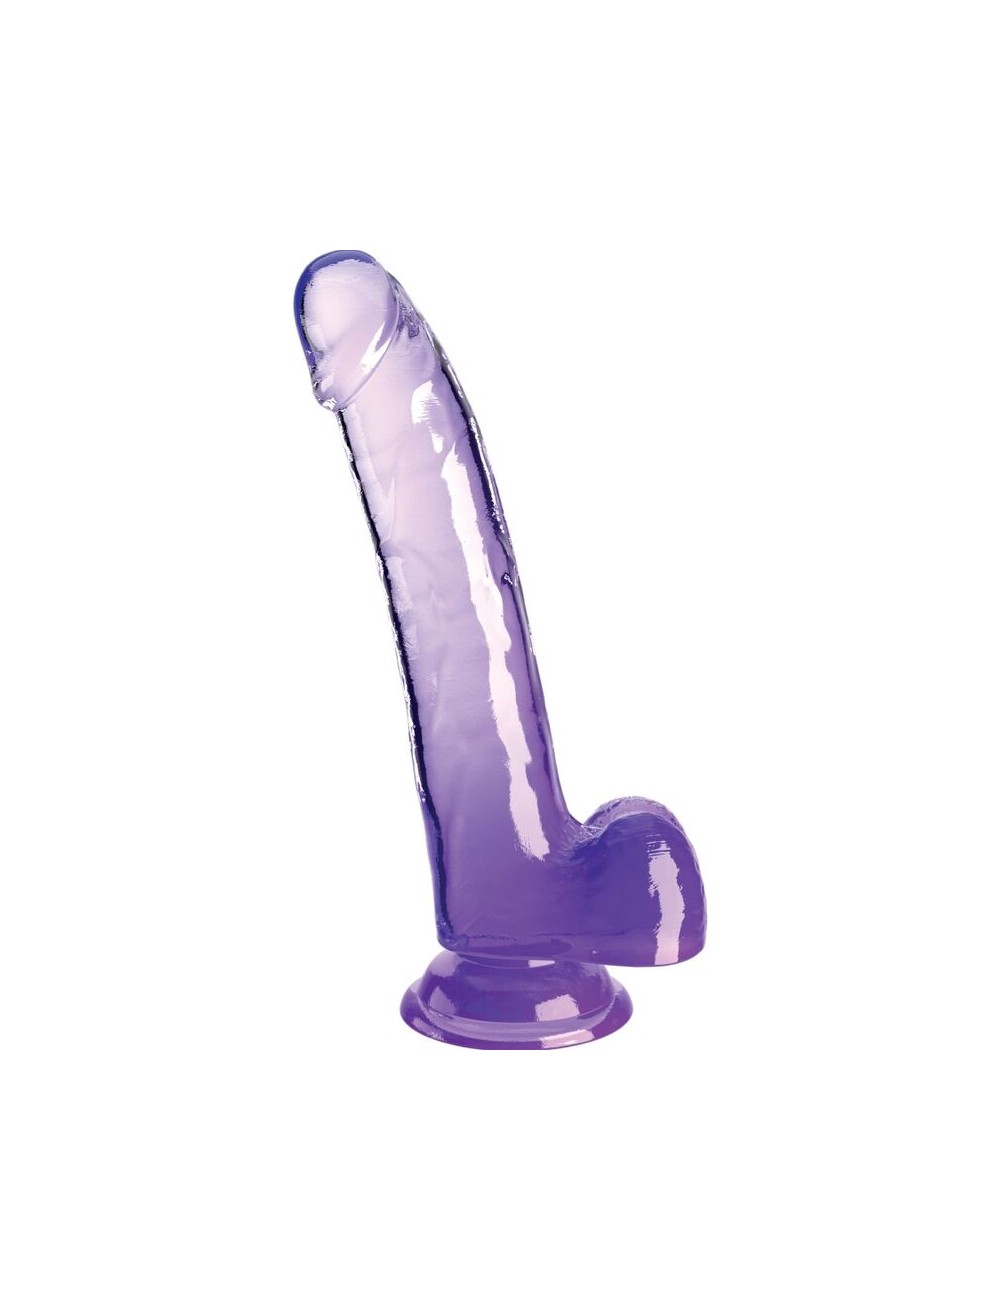 KING COCK - CLEAR DILDO WITH TESTICLES 20.3 CM PURPLE